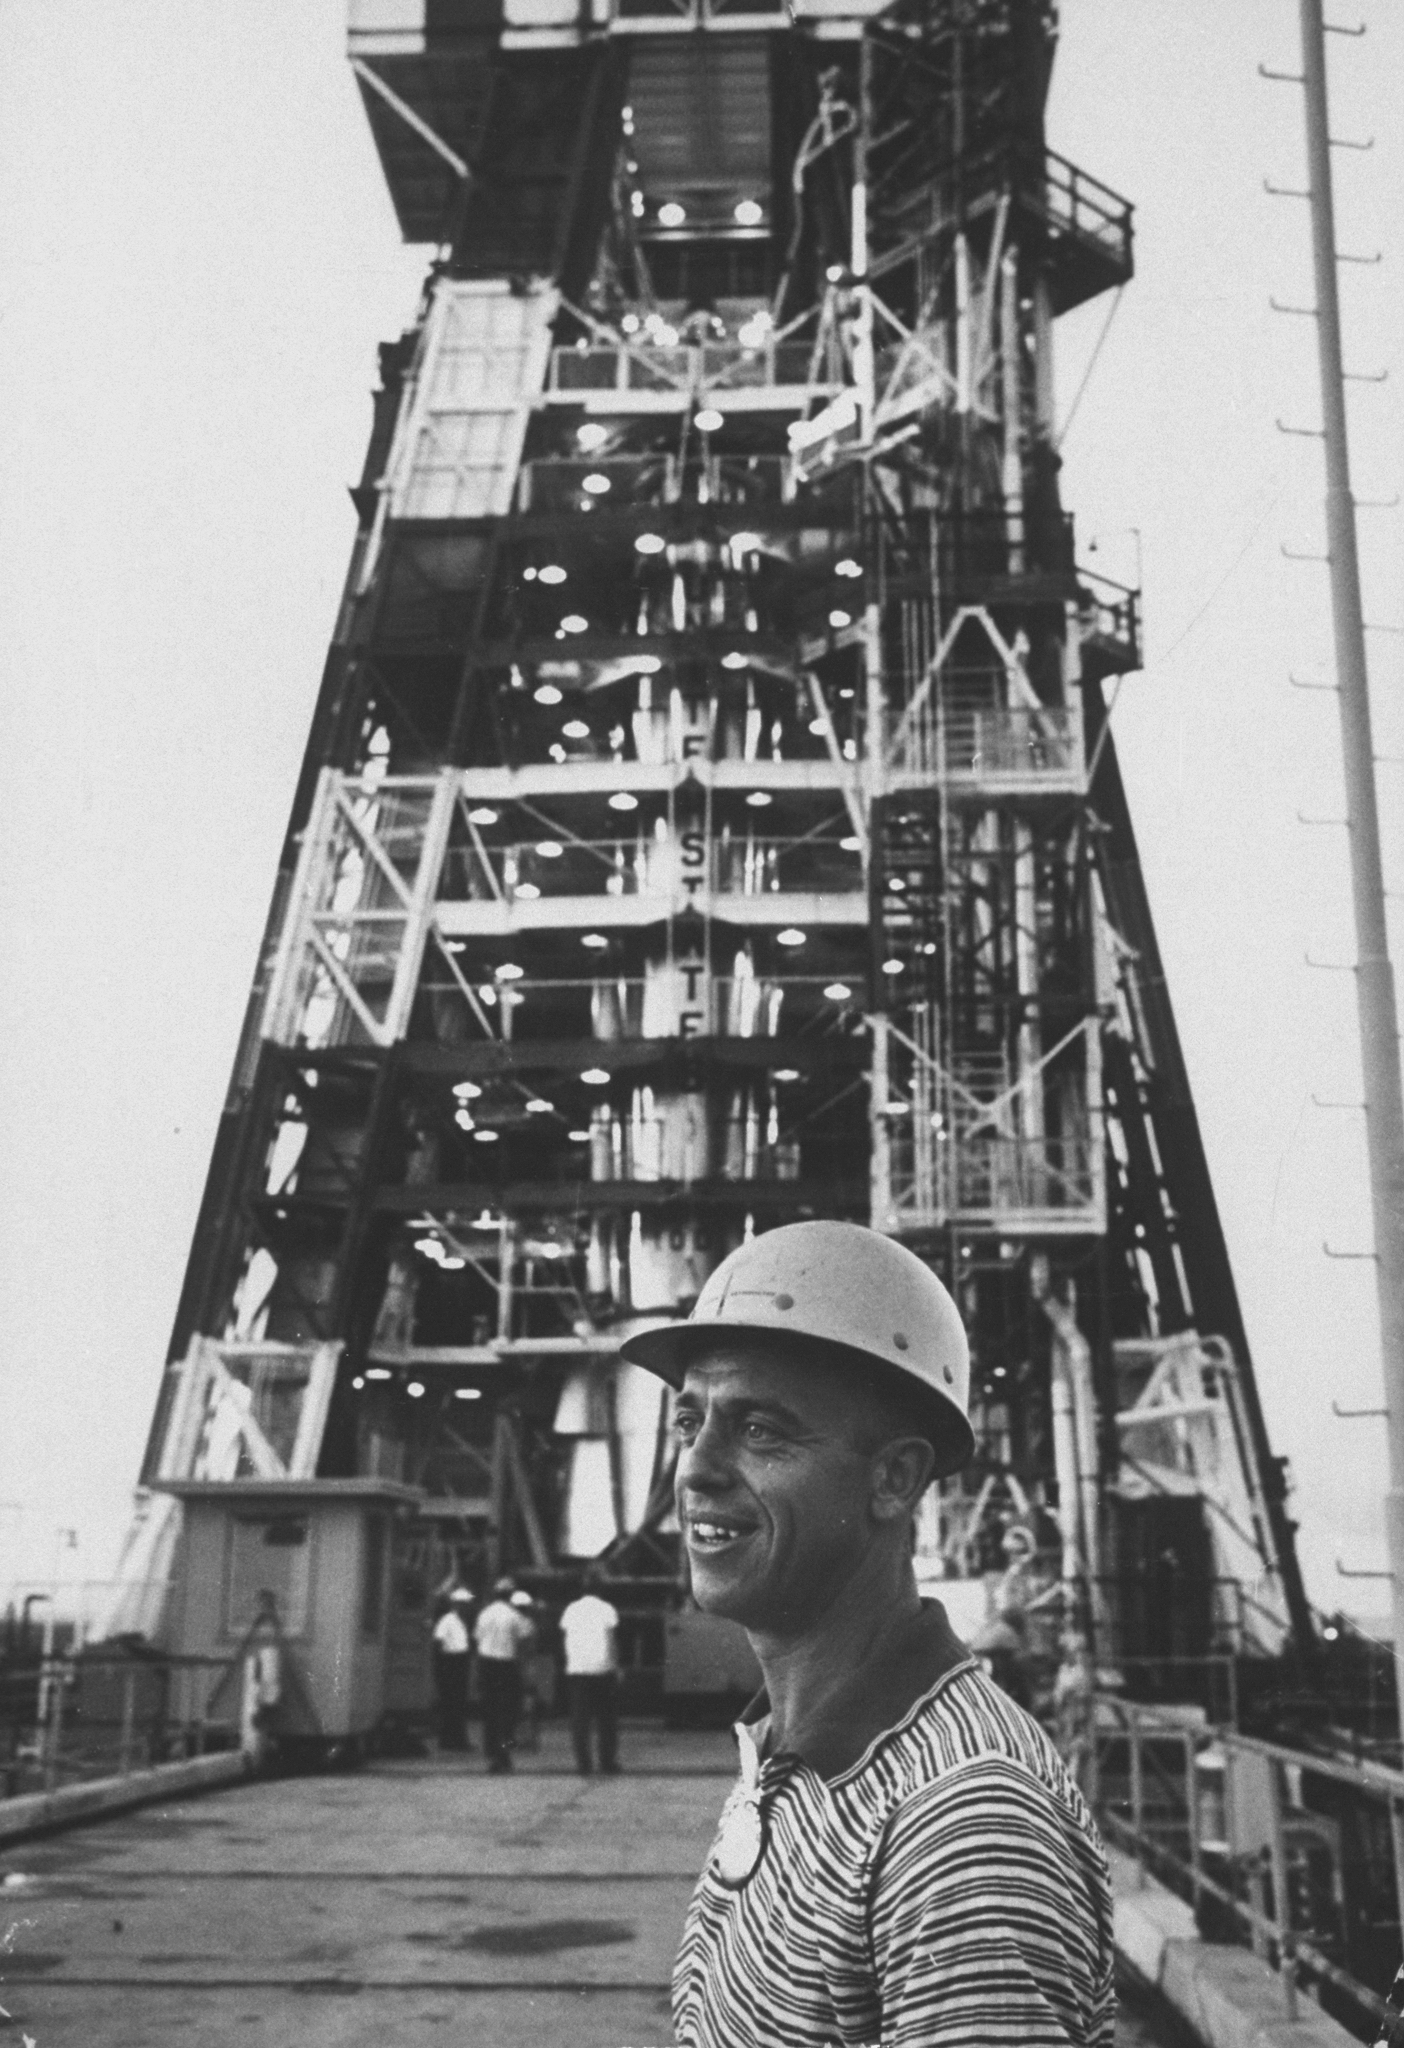 Alan Shepard standing next to a missile launch platform, 1959.